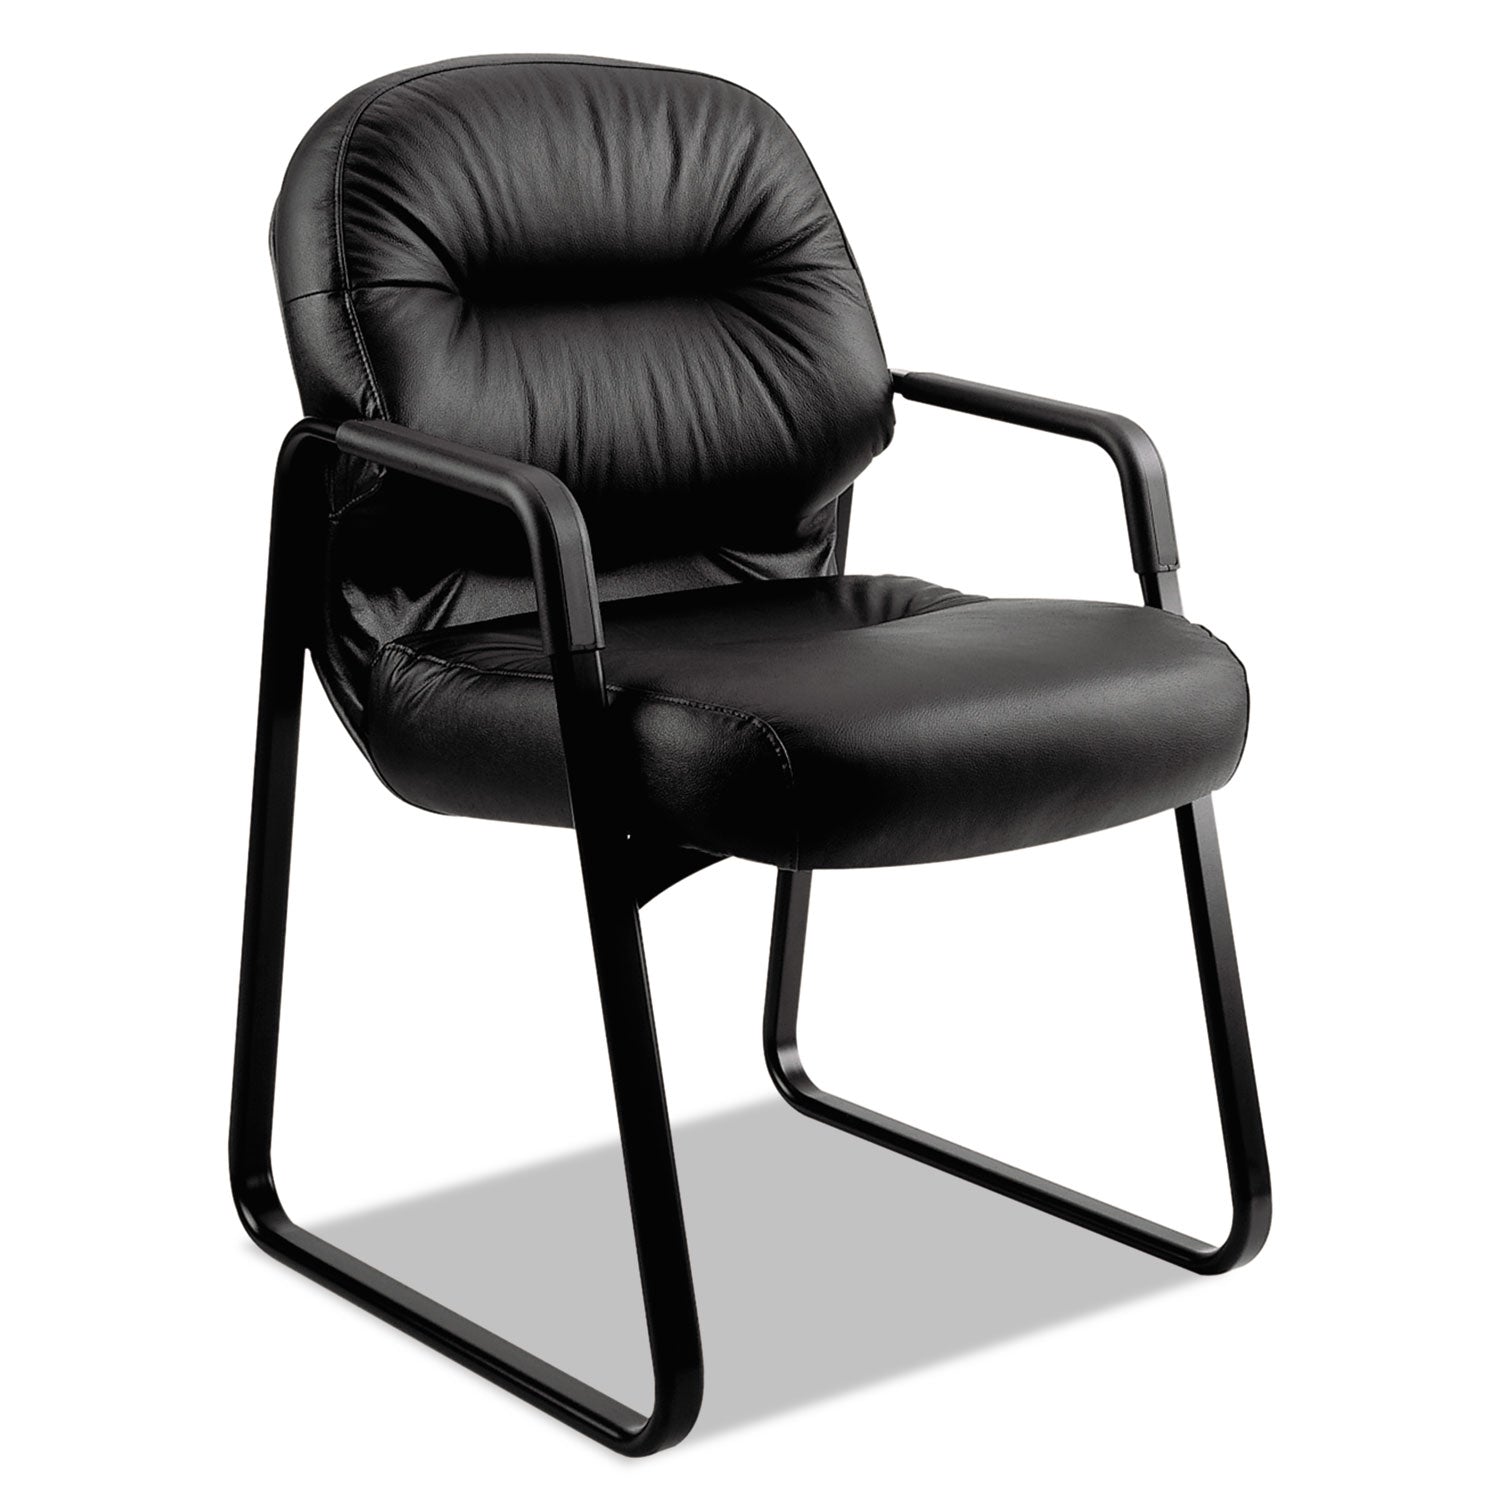 Pillow-Soft 2090 Series Guest Arm Chair, Leather Upholstery, 31.25" x 35.75" x 36", Black Seat, Black Back, Black Base - 